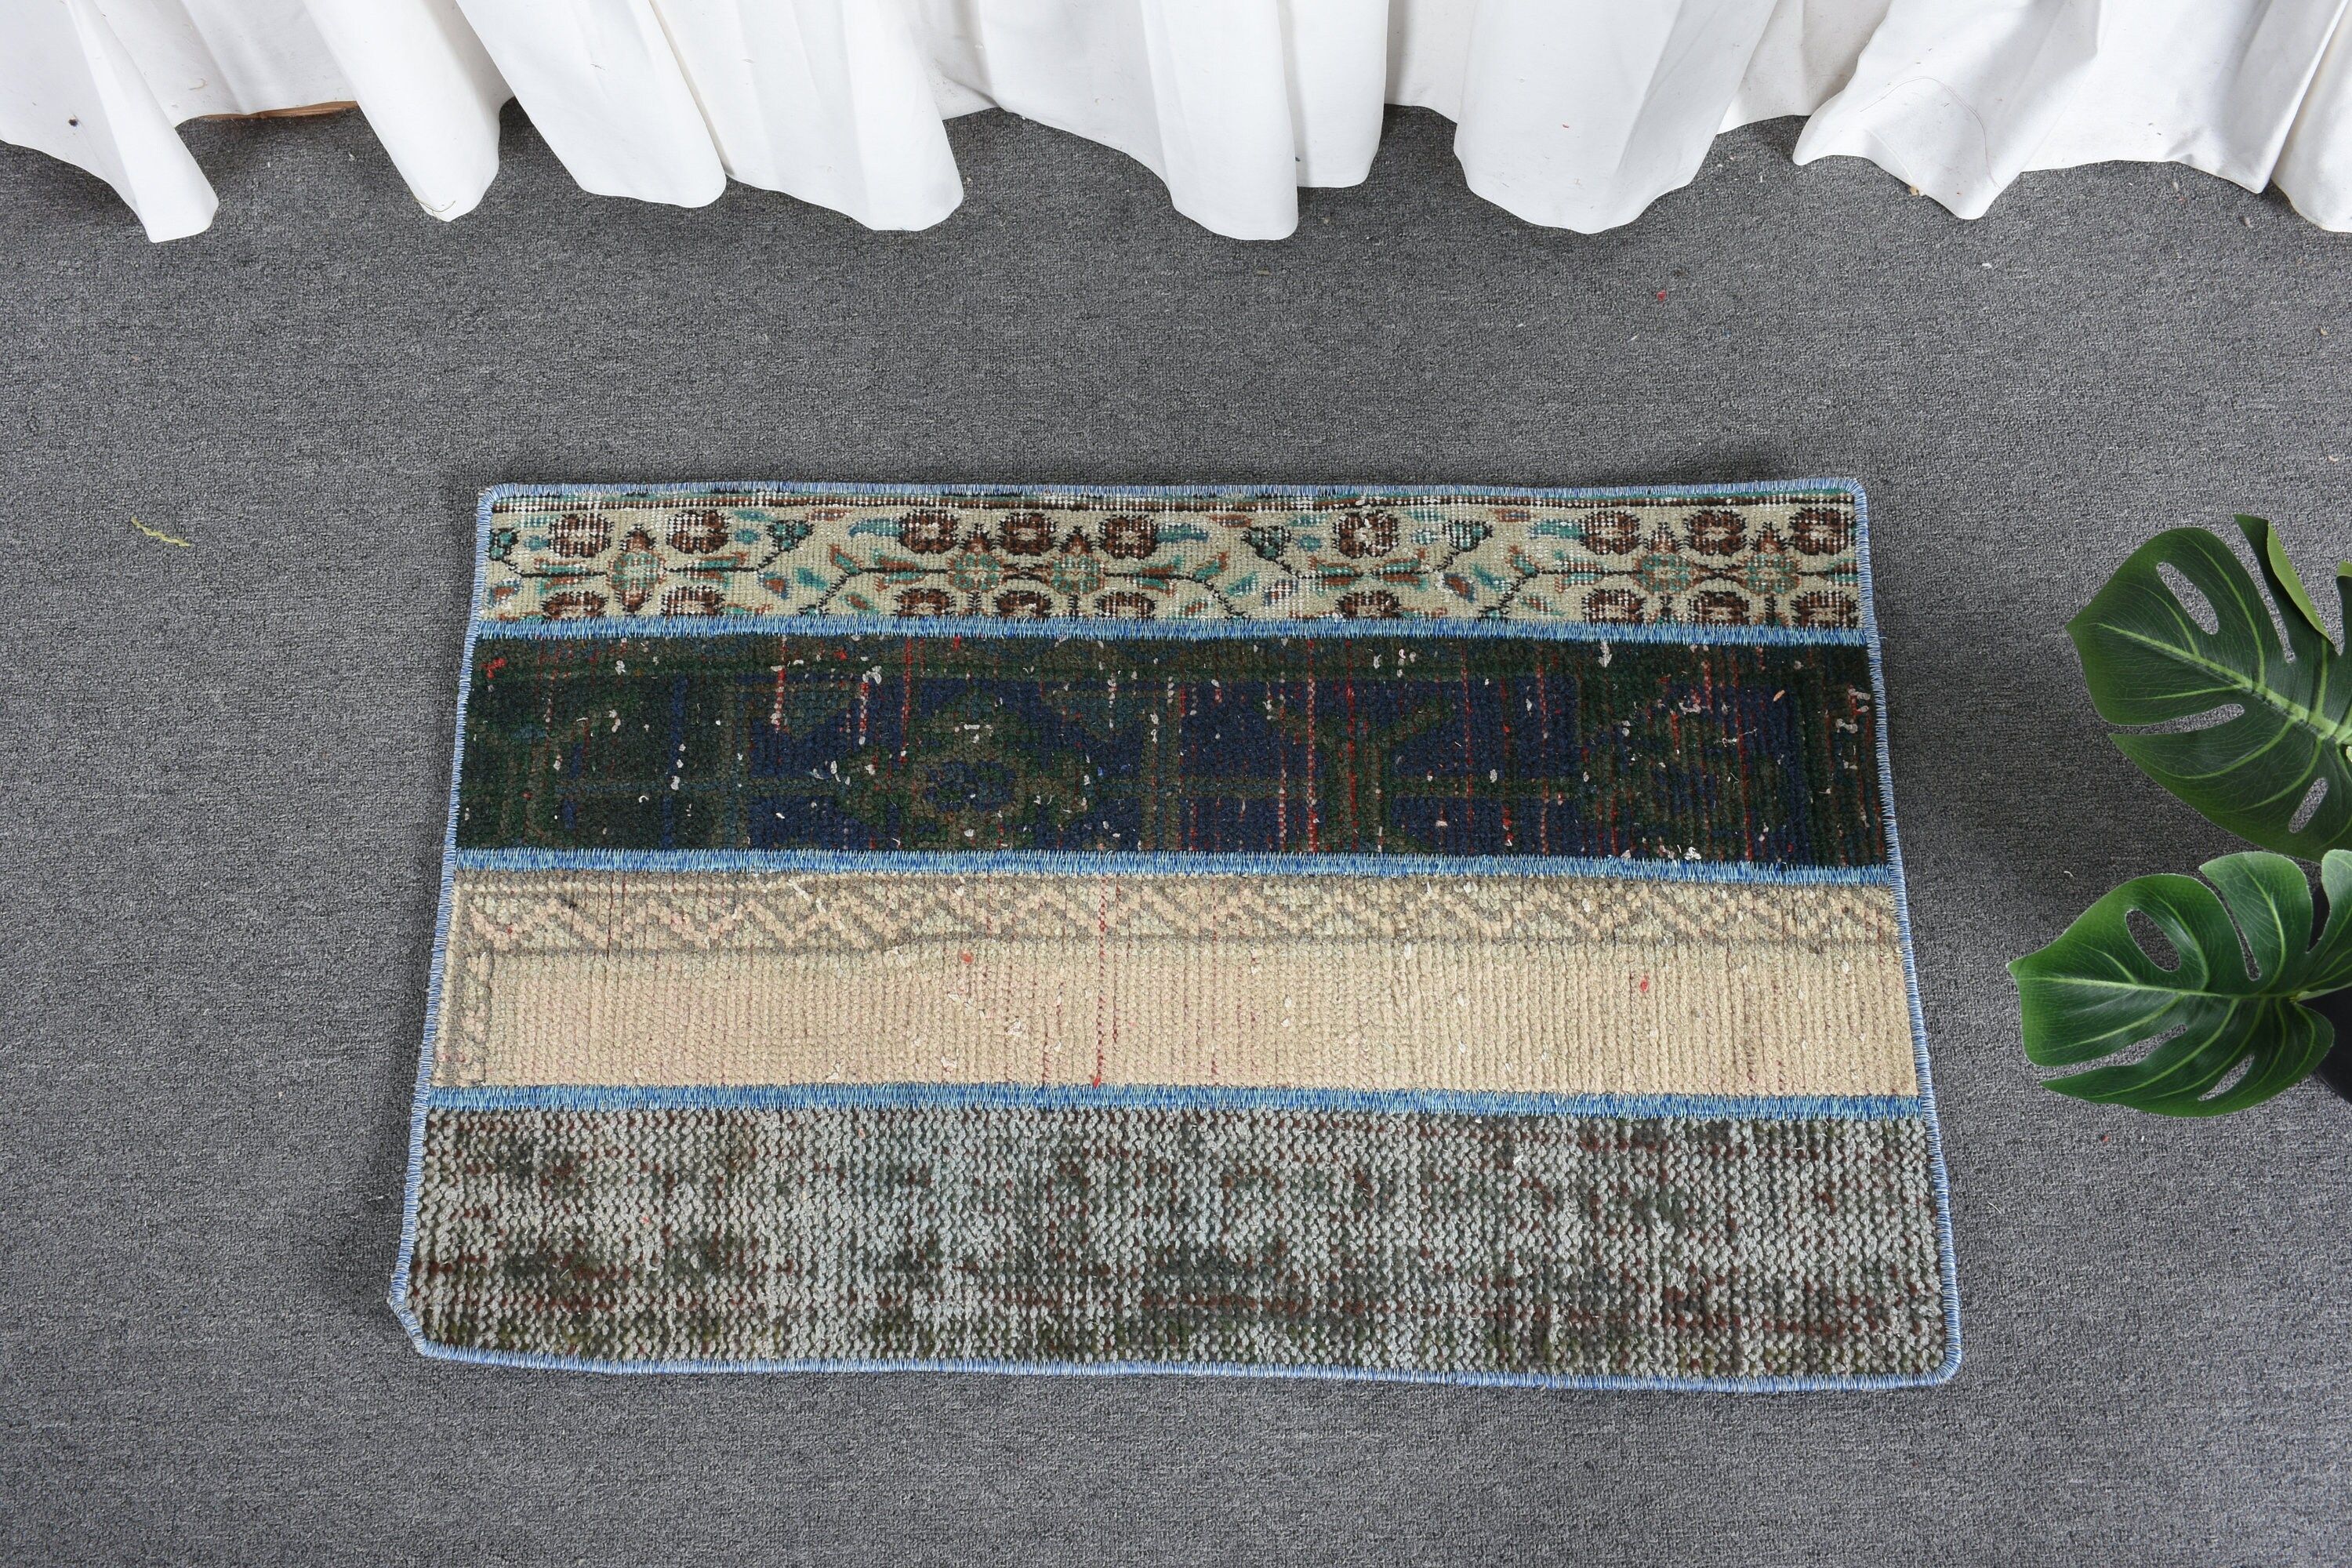 Moroccan Rug, Vintage Rug, 1.8x2.9 ft Small Rugs, Bedroom Rugs, Blue Antique Rugs, Turkish Rug, Kitchen Rugs, Rugs for Bath, Entry Rugs